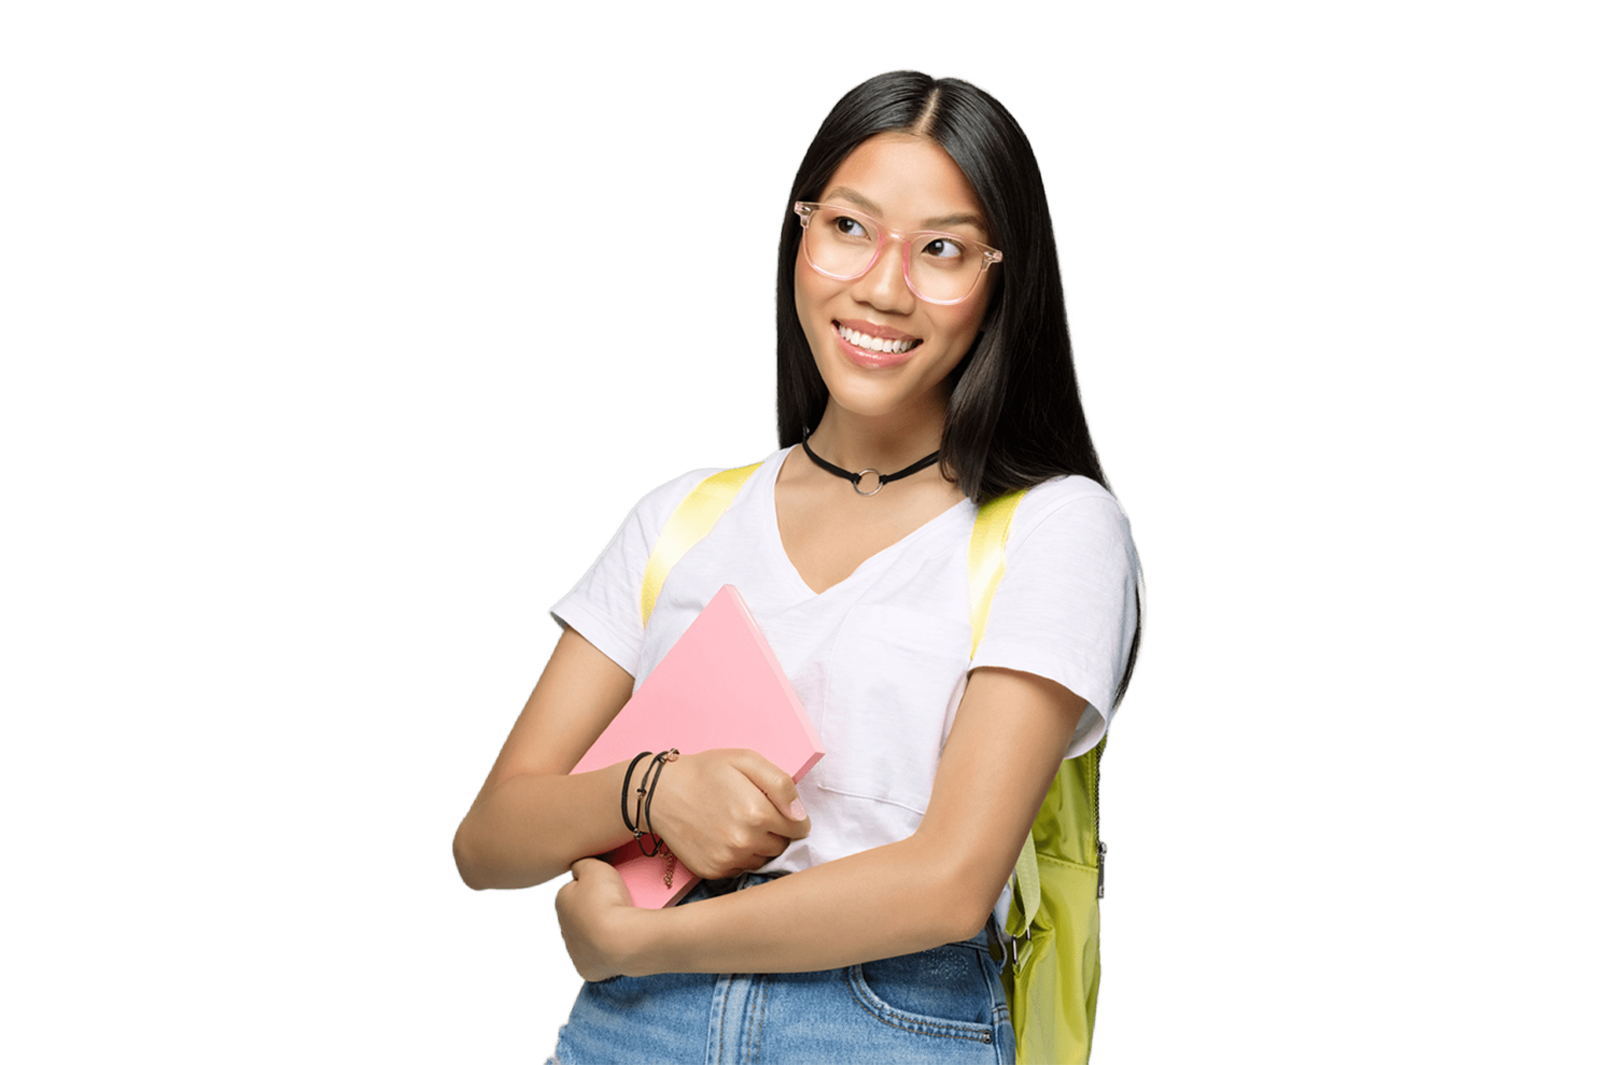 Student smiling and holding books